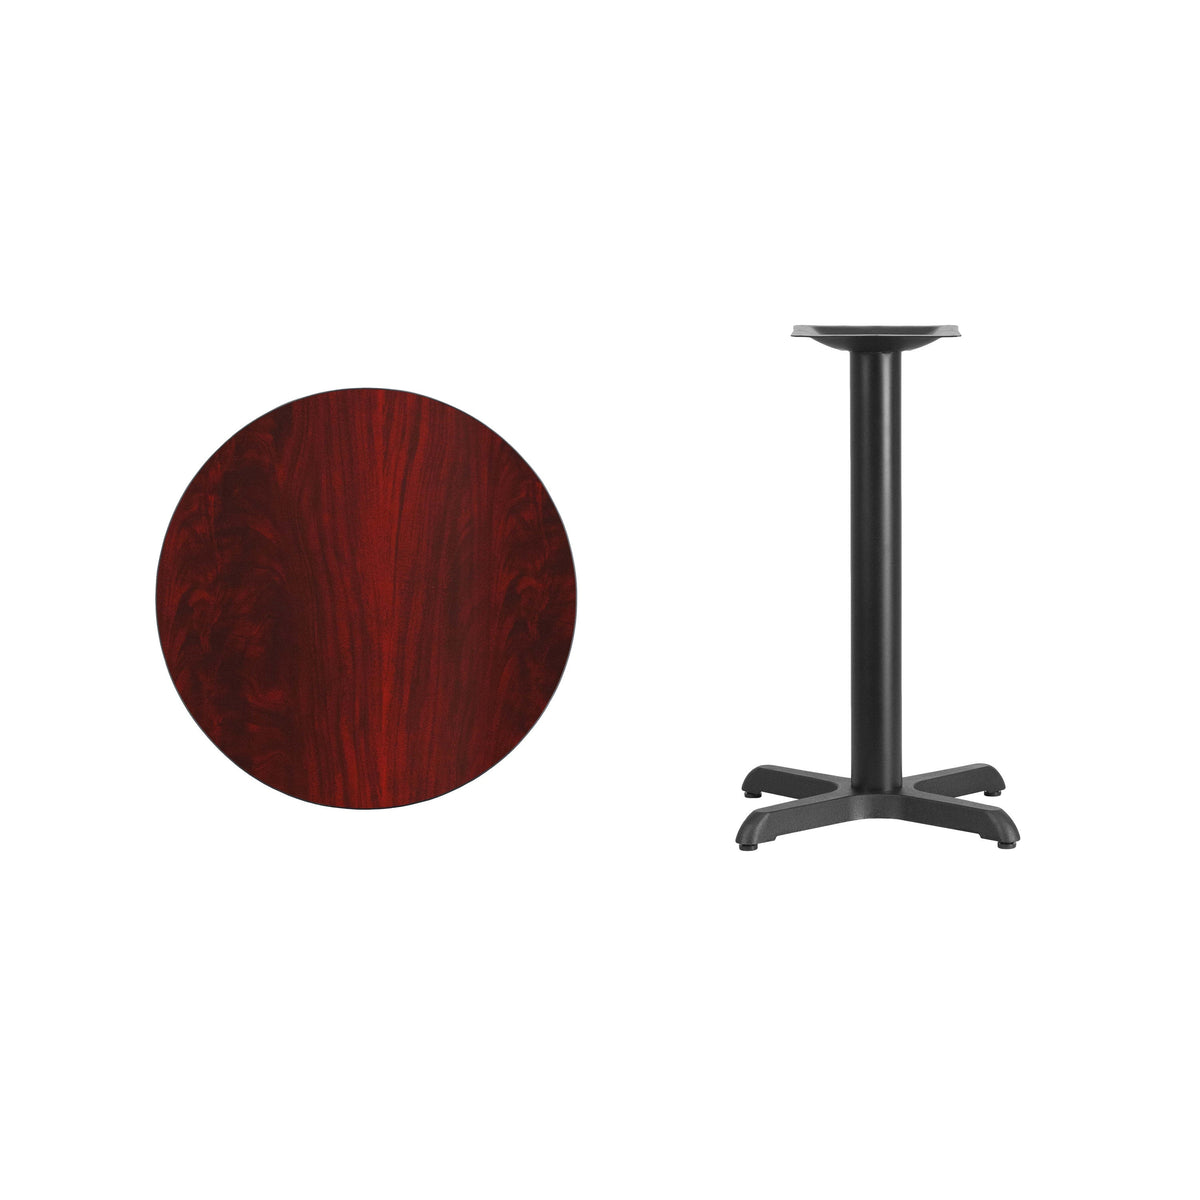 Mahogany |#| 24inch Round Mahogany Laminate Table Top with 22inch x 22inch Table Height Base